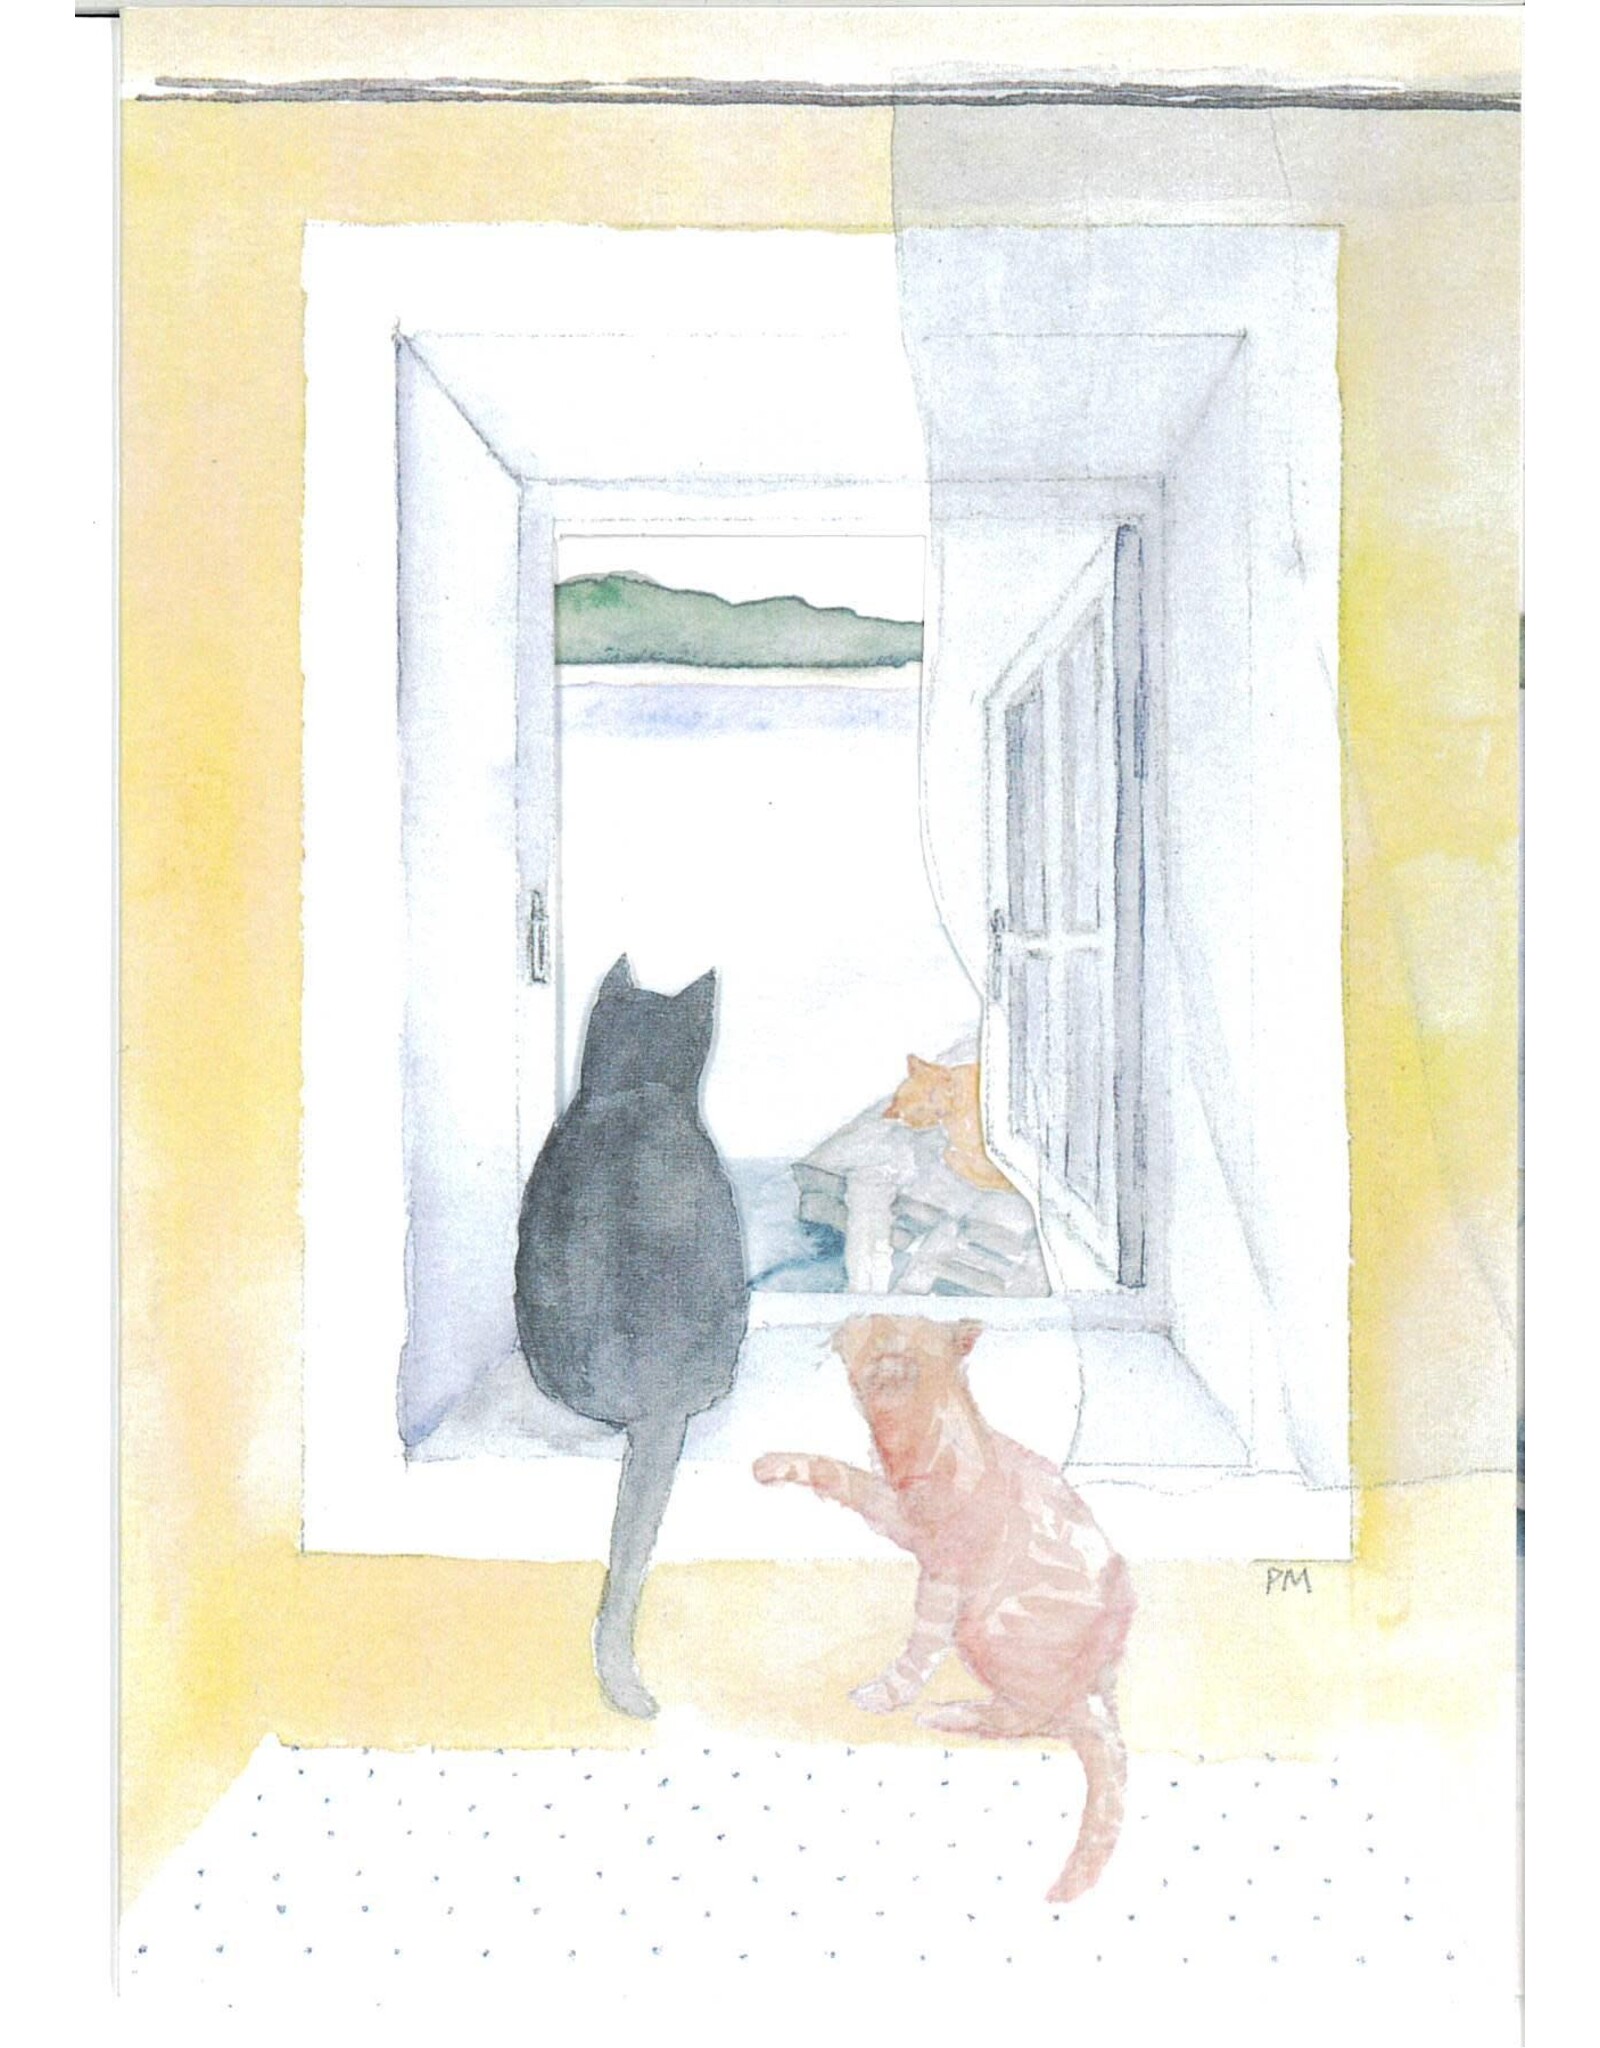 Cats in Window Watercolor Card